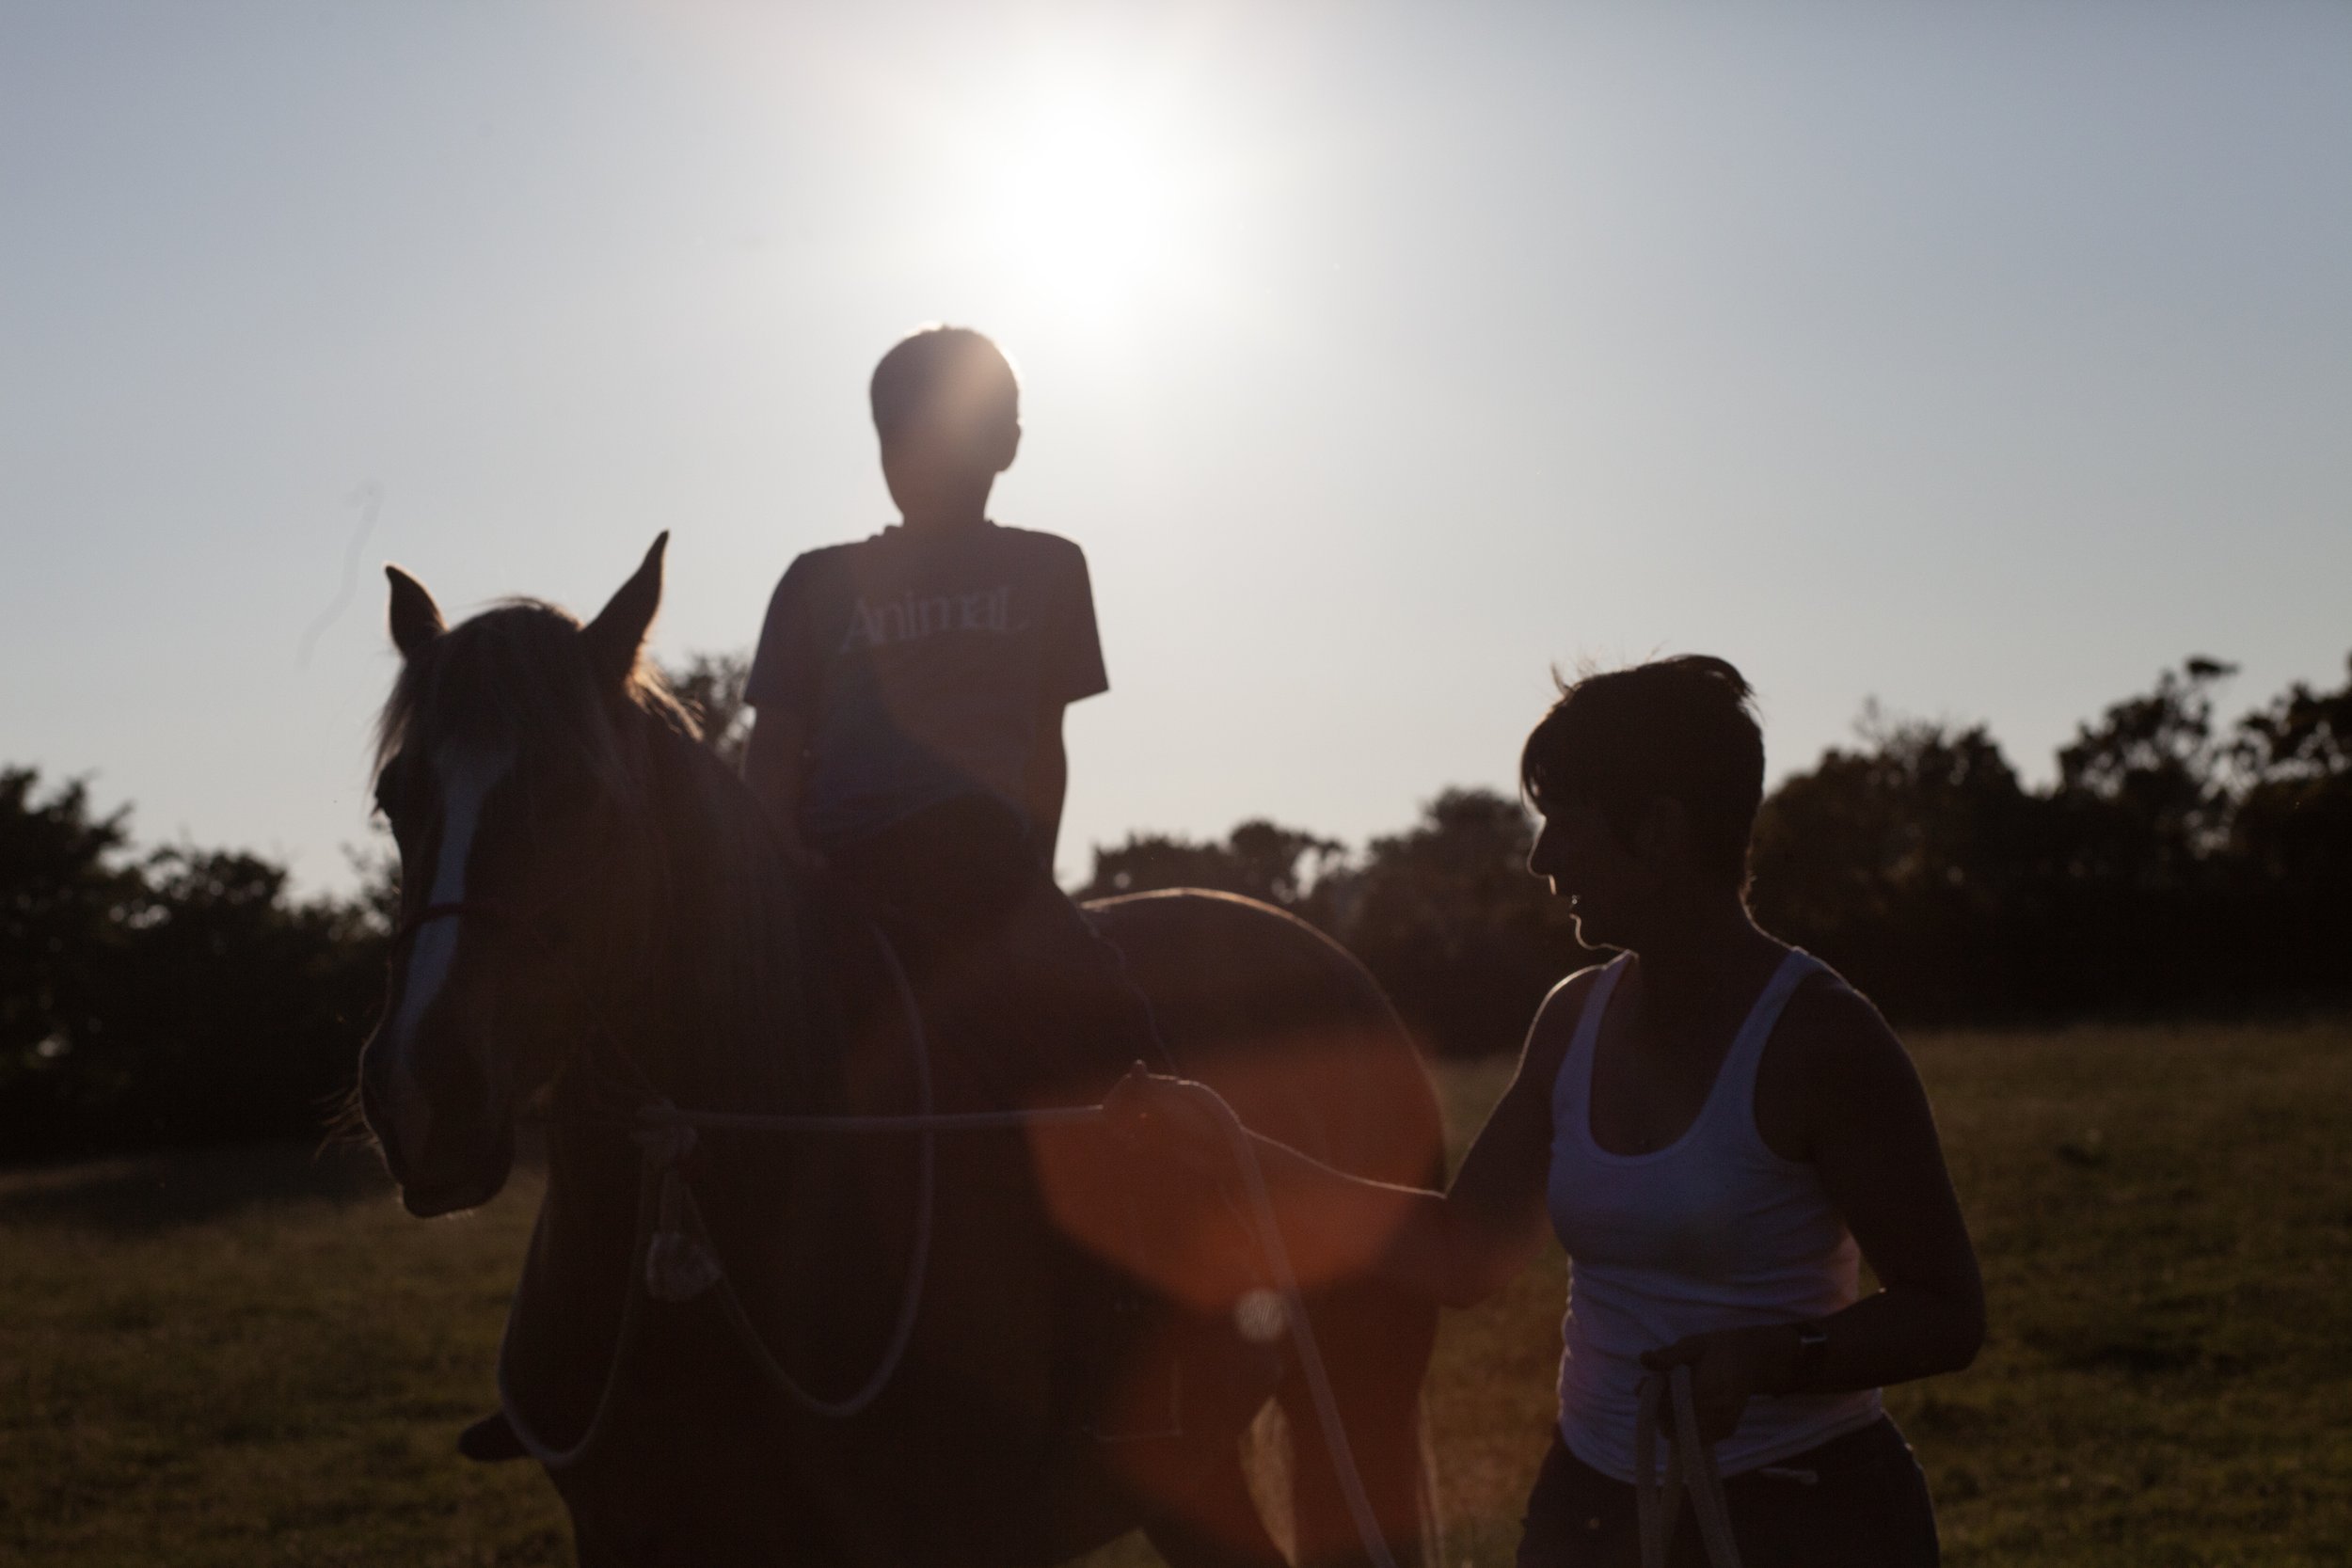  Horse Boy Camp for children on the autism spectrum, Cornwall, England. 